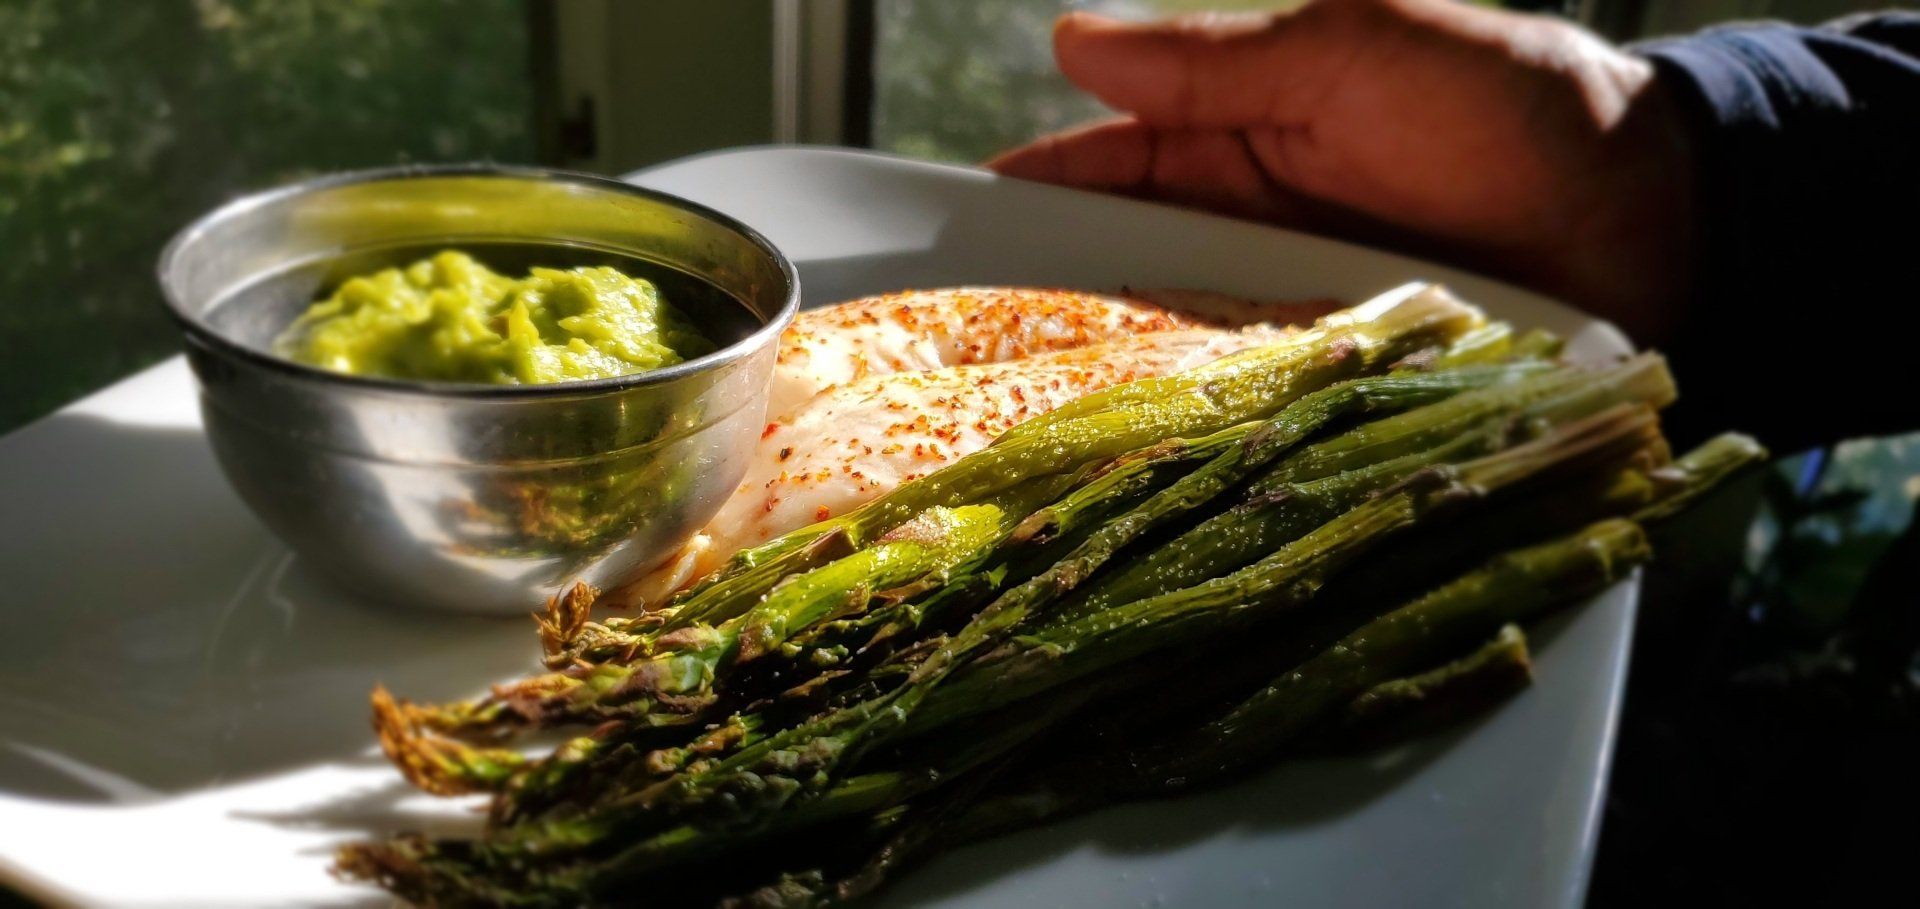 Stephen Haywood shows his Tilapia and Asparagus meal